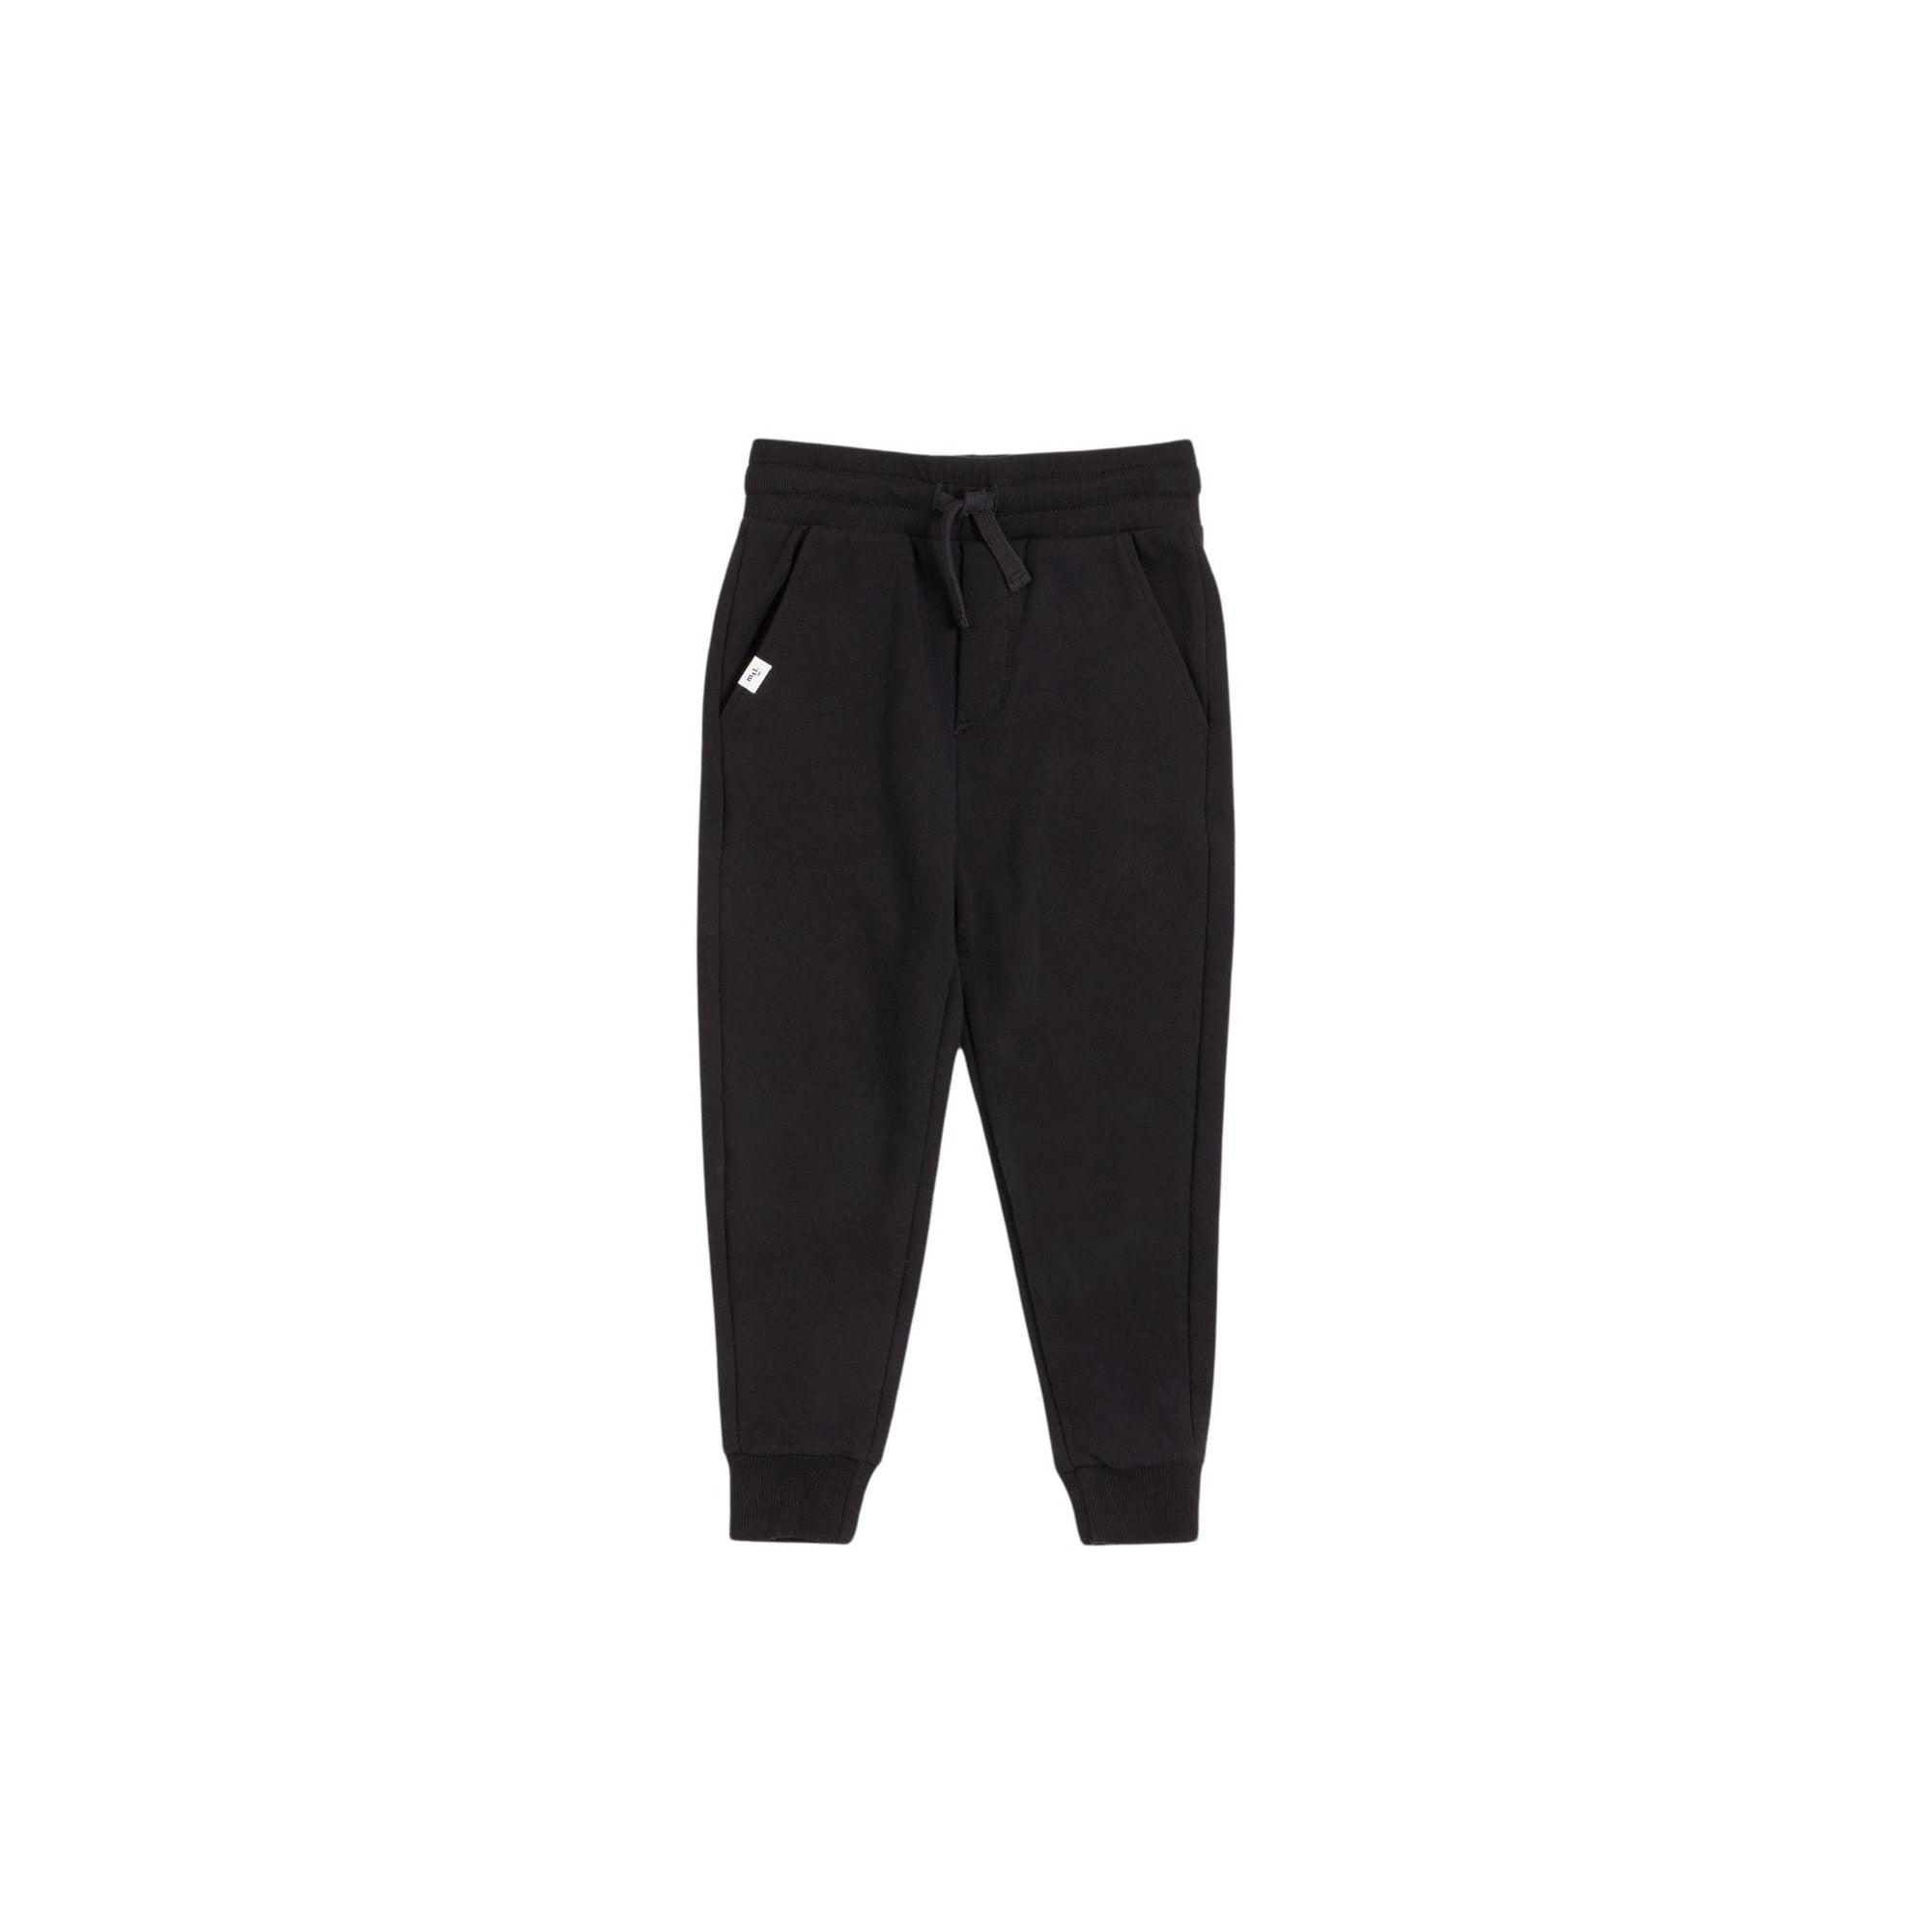 French Terry Black Sweatpants